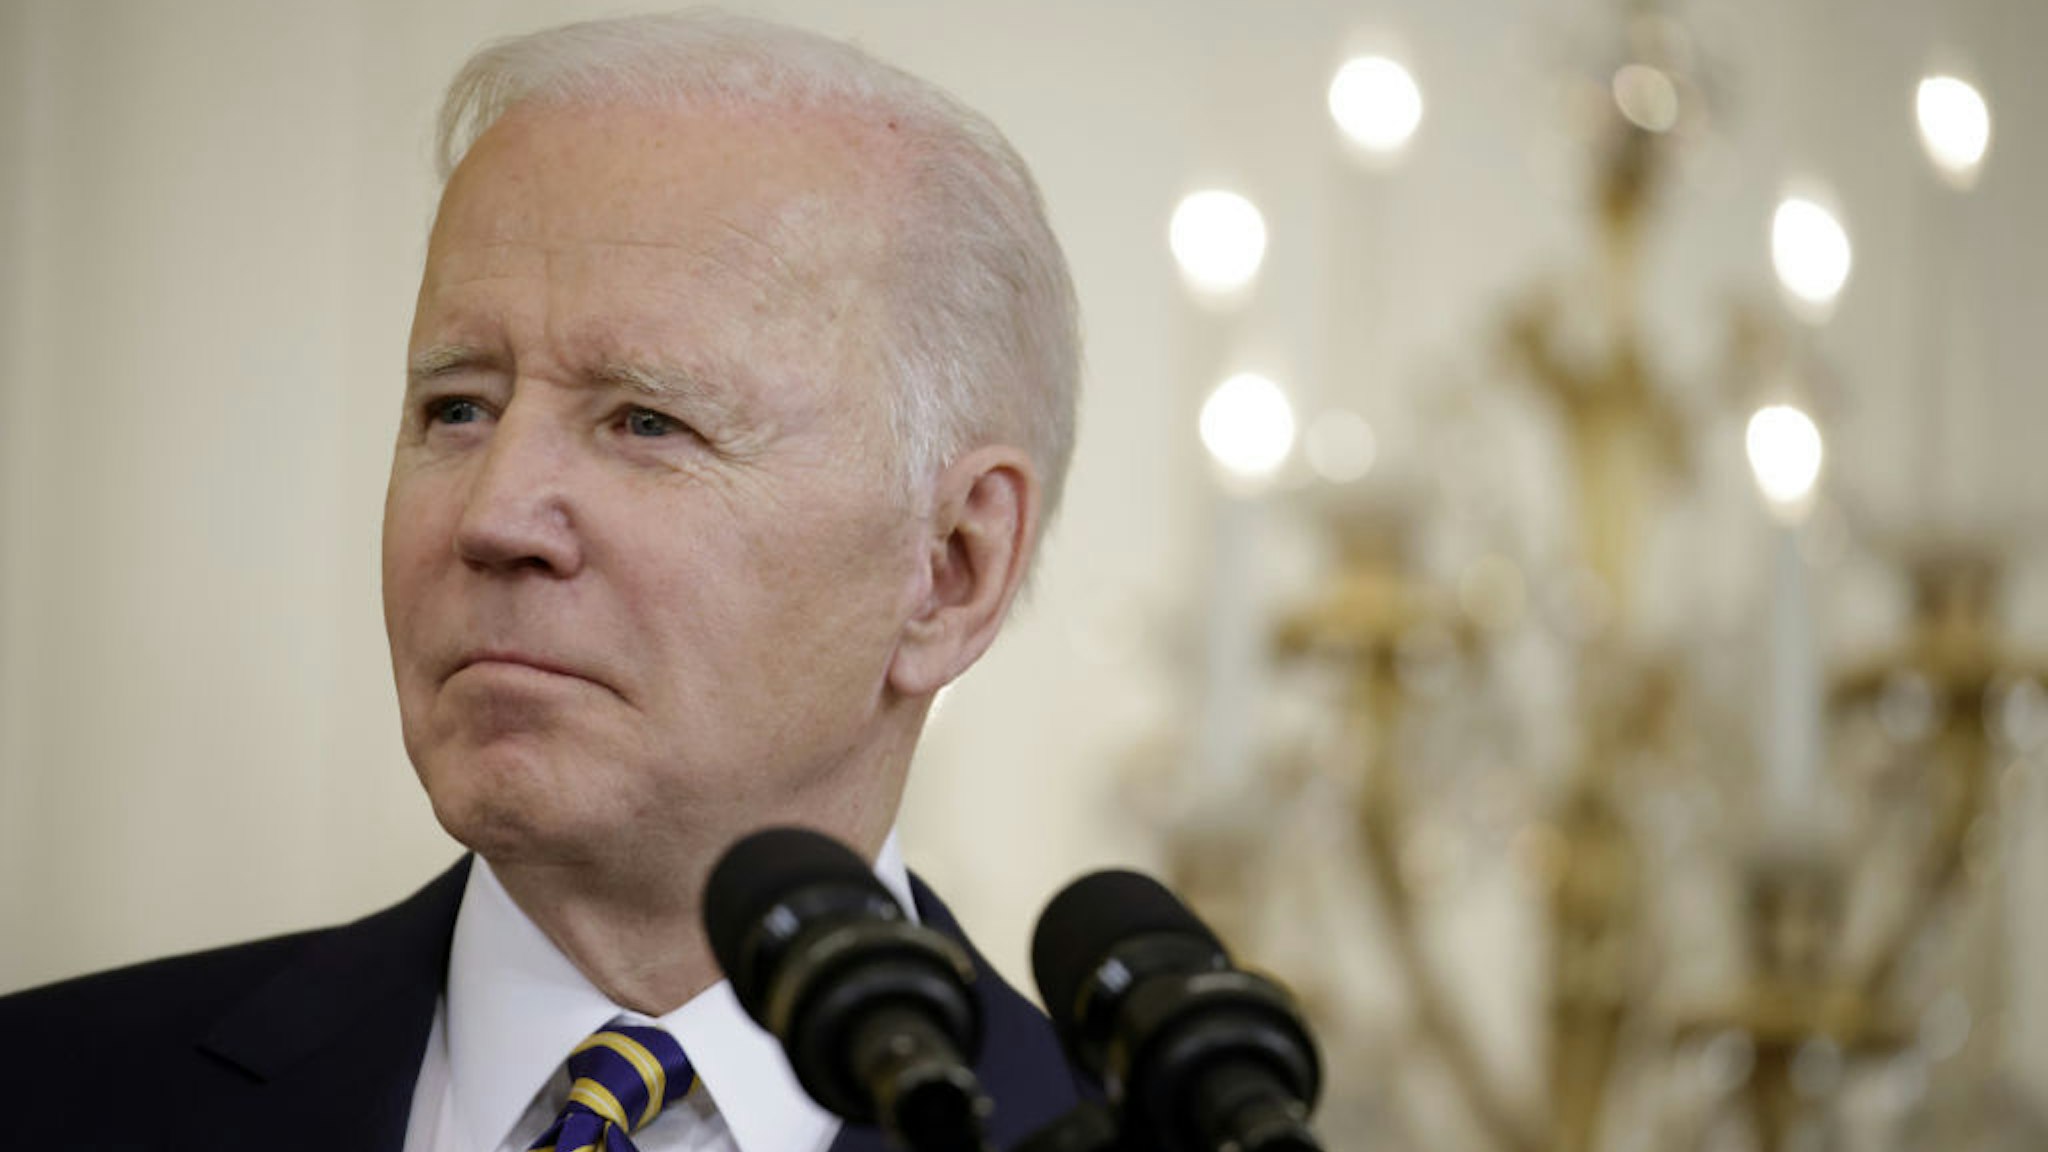 U.S. President Joe Biden during a joint statement with Lee Hsien Loong, Singapore's prime minister, not pictured, in the East Room of the White House in Washington, D.C., U.S., on Tuesday, March 29, 2022. Biden thanked Lee Hsien Loong for supporting Ukraine during a meeting this morning and said the two leaders would discuss U.S. strategy in the Indo-Pacific region. Photographer: Samuel Corum/Bloomberg